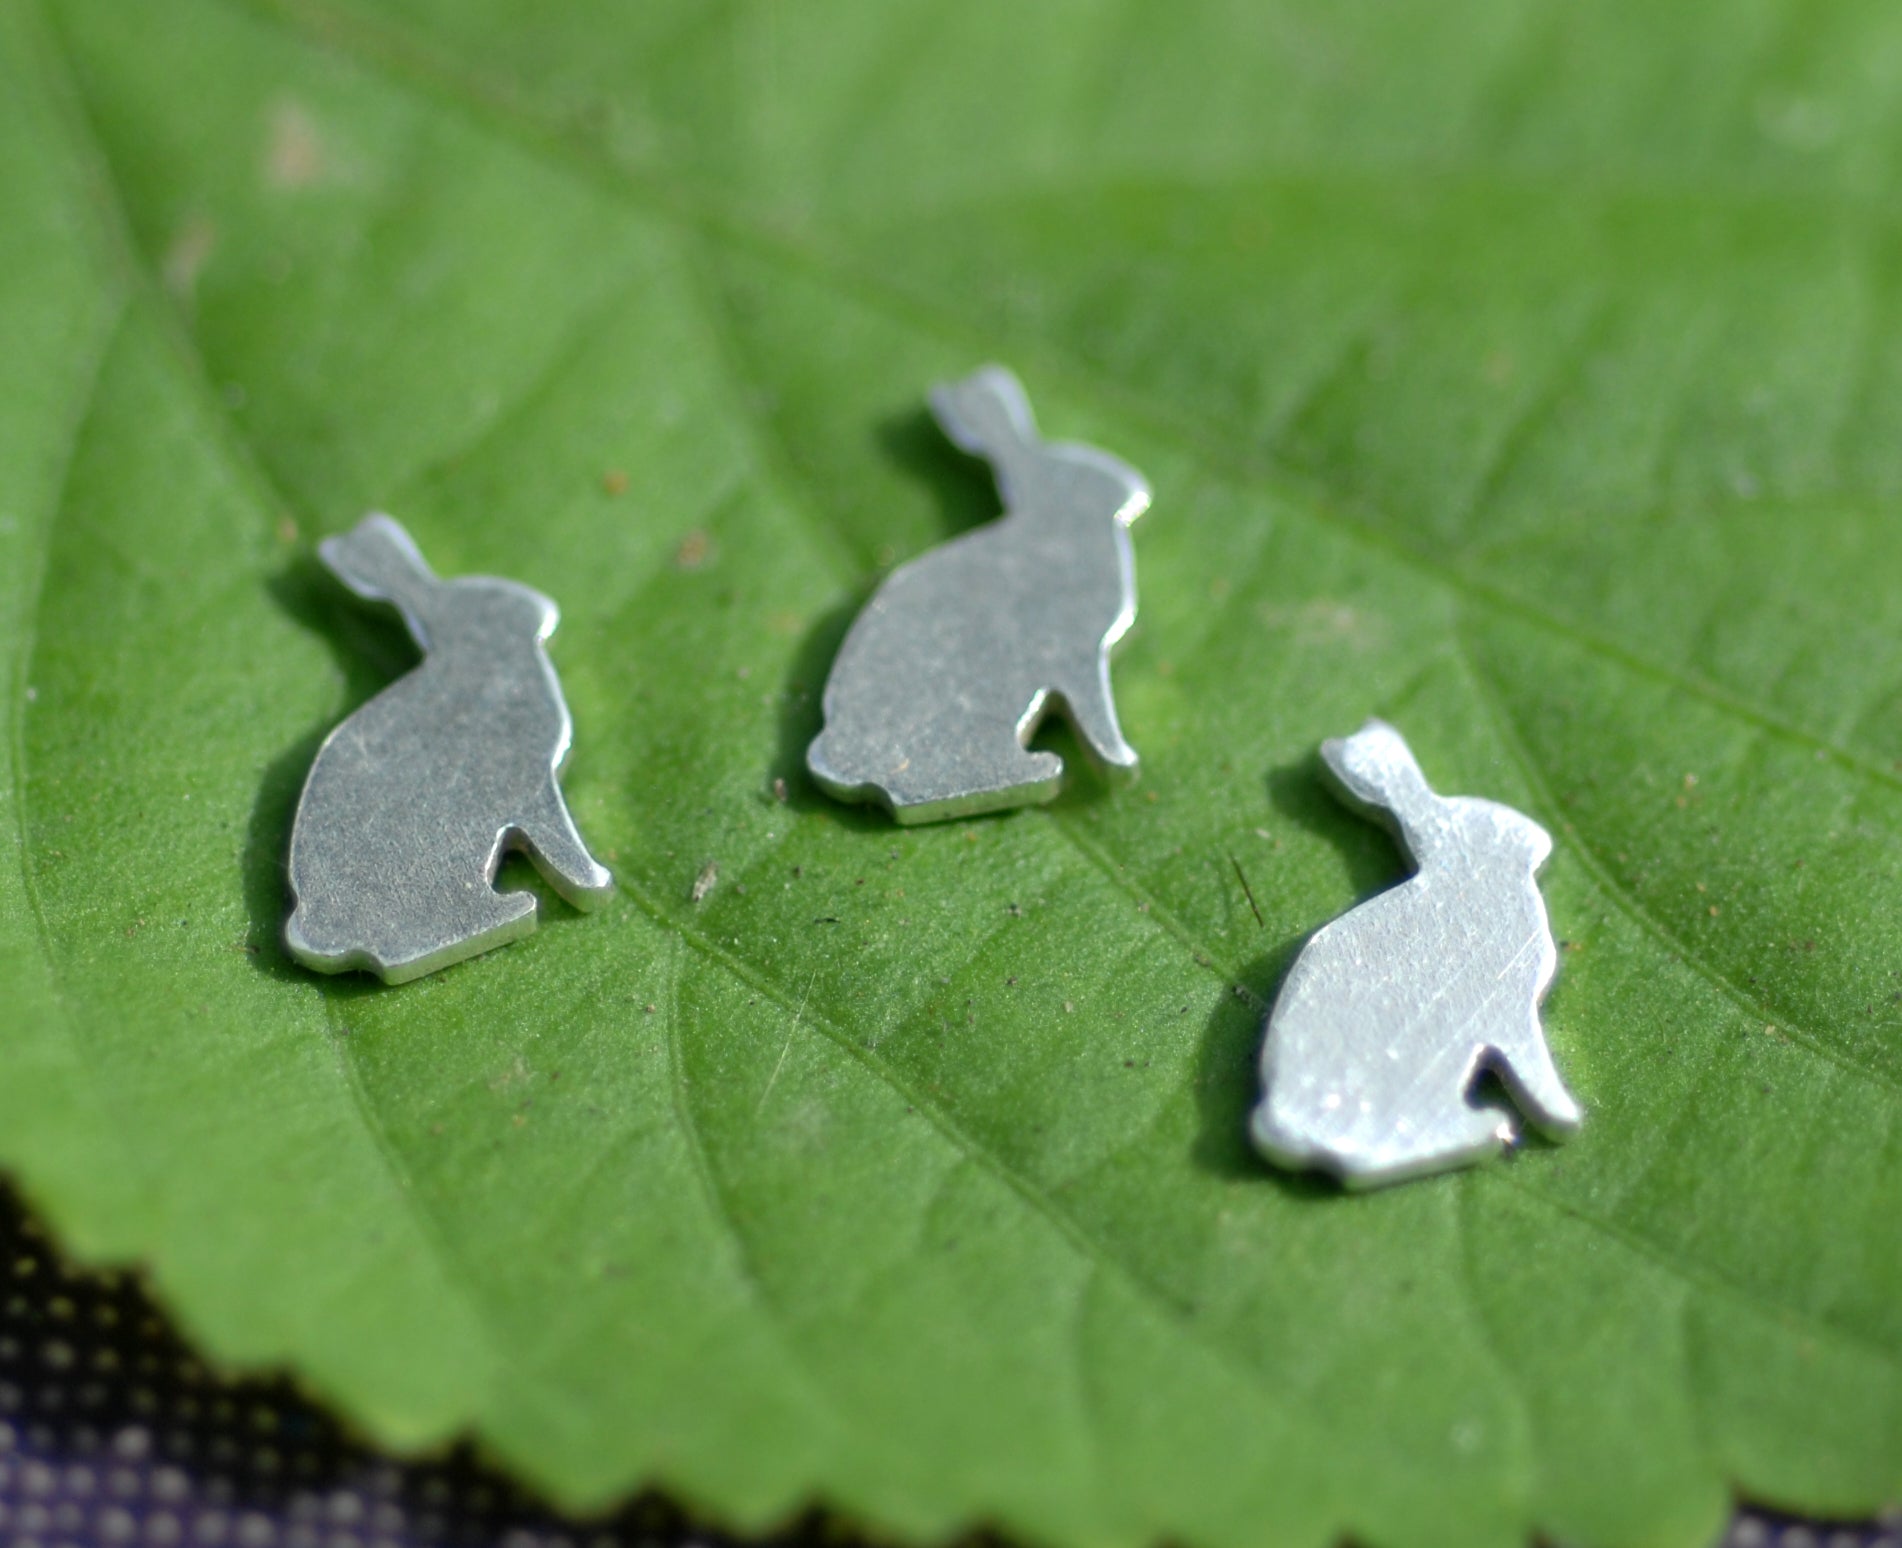 Our Most Tiny Metal Blanks - Bunny Rabbit Shaped Mini Blank #2